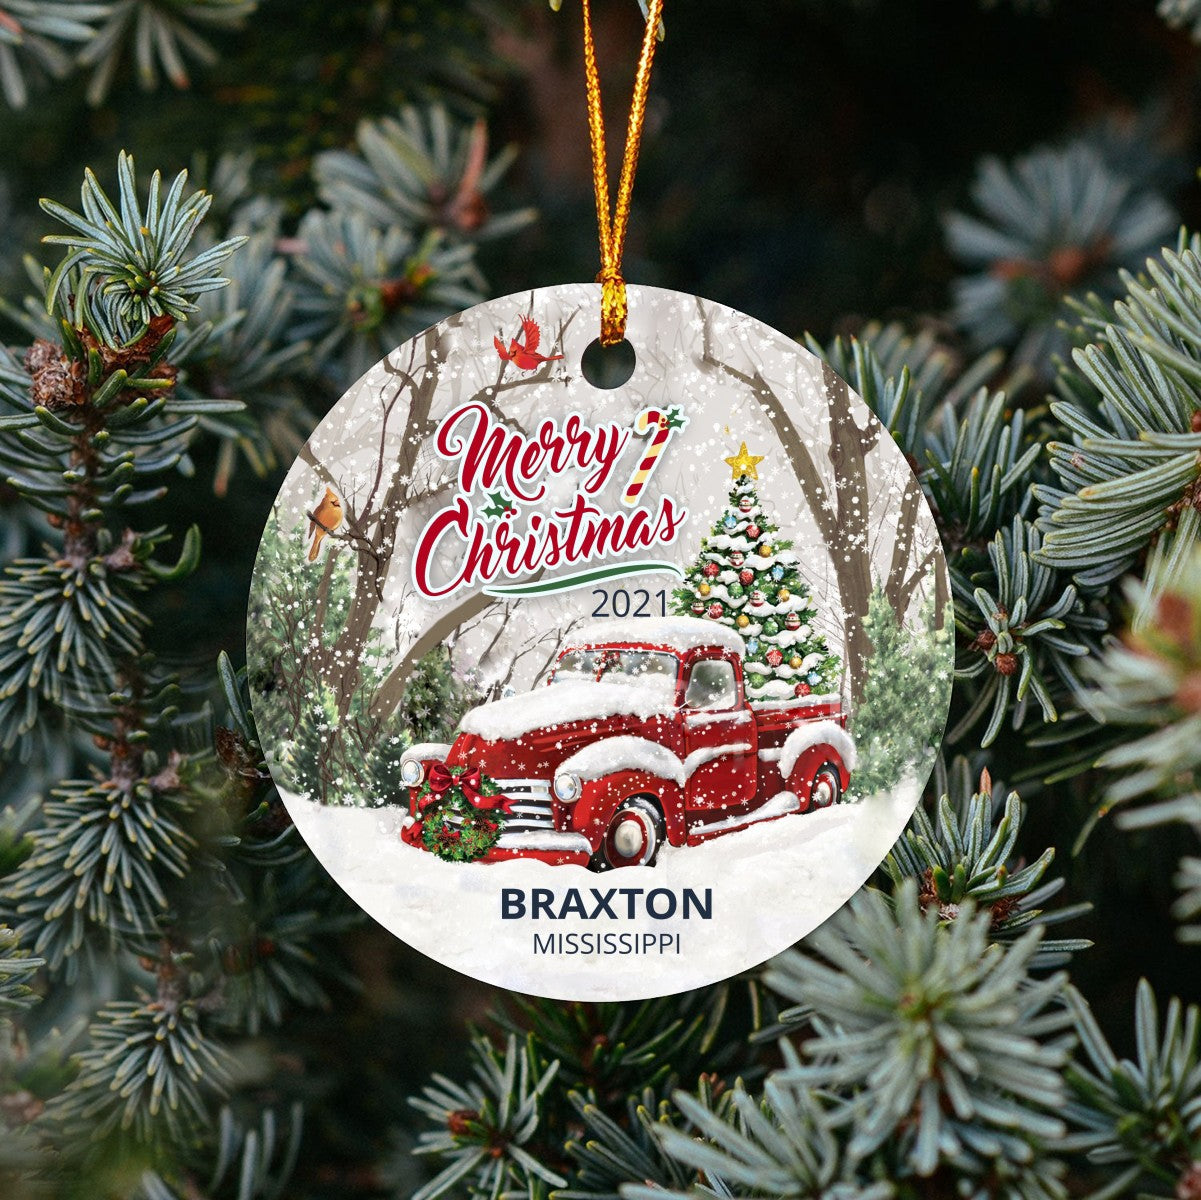 Christmas Tree Ornaments Braxton - Ornament With Name City, State Braxton Mississippi MS Ornament - Red Truck Xmas Ornaments 3'' Plastic Gift For Family, Friend And Housewarming